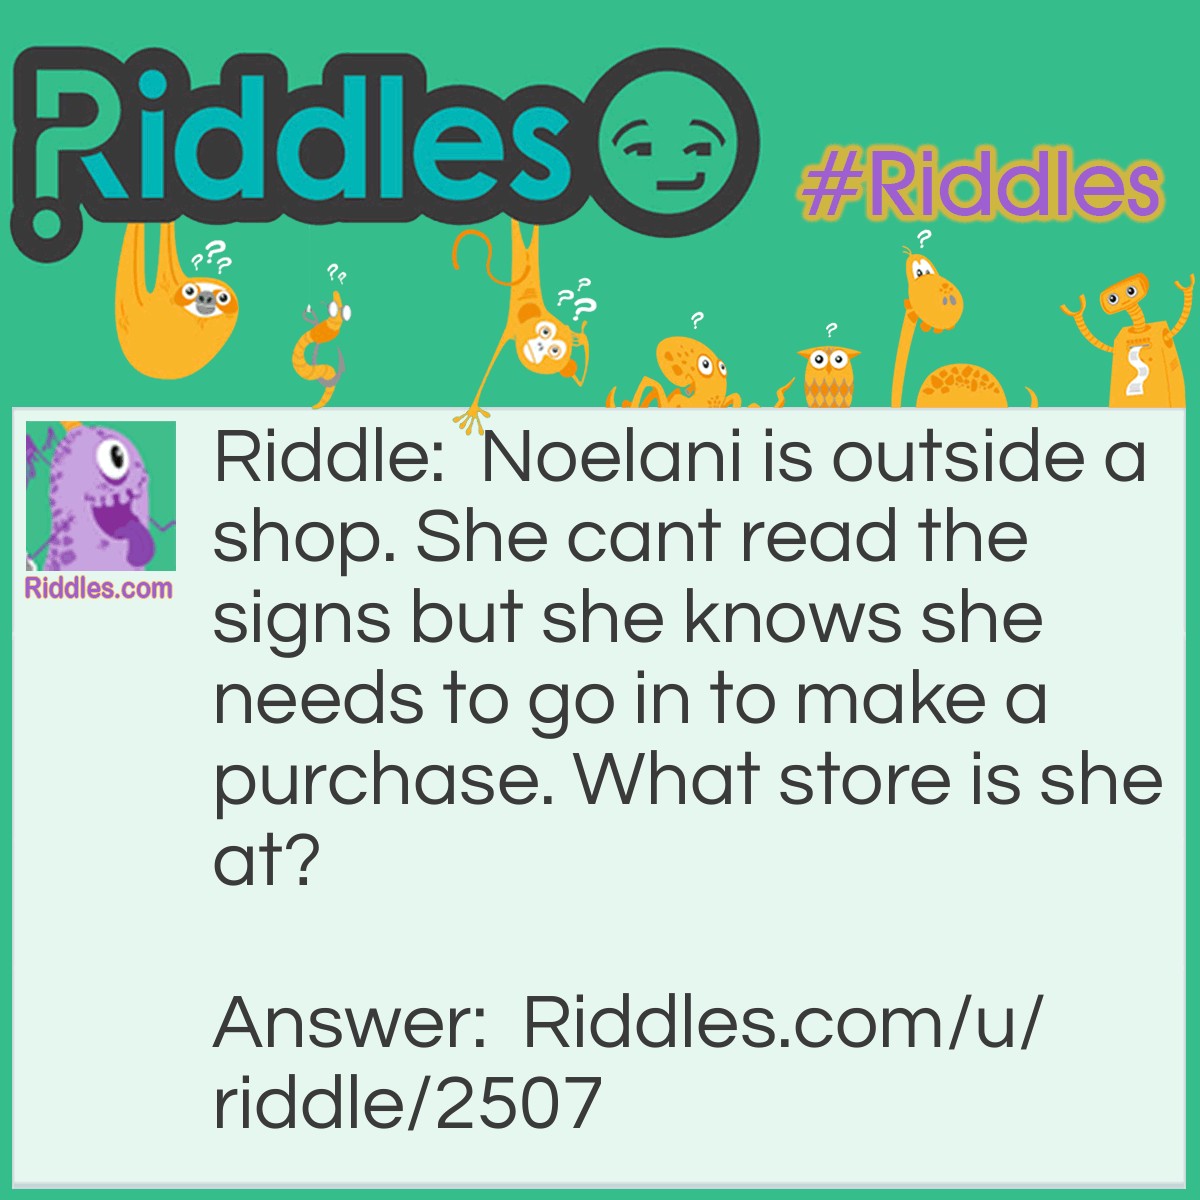 Riddle: Noelani is outside a shop. She cant read the signs but she knows she needs to go in to make a purchase. What store is she at? Answer: Eye glasses store.